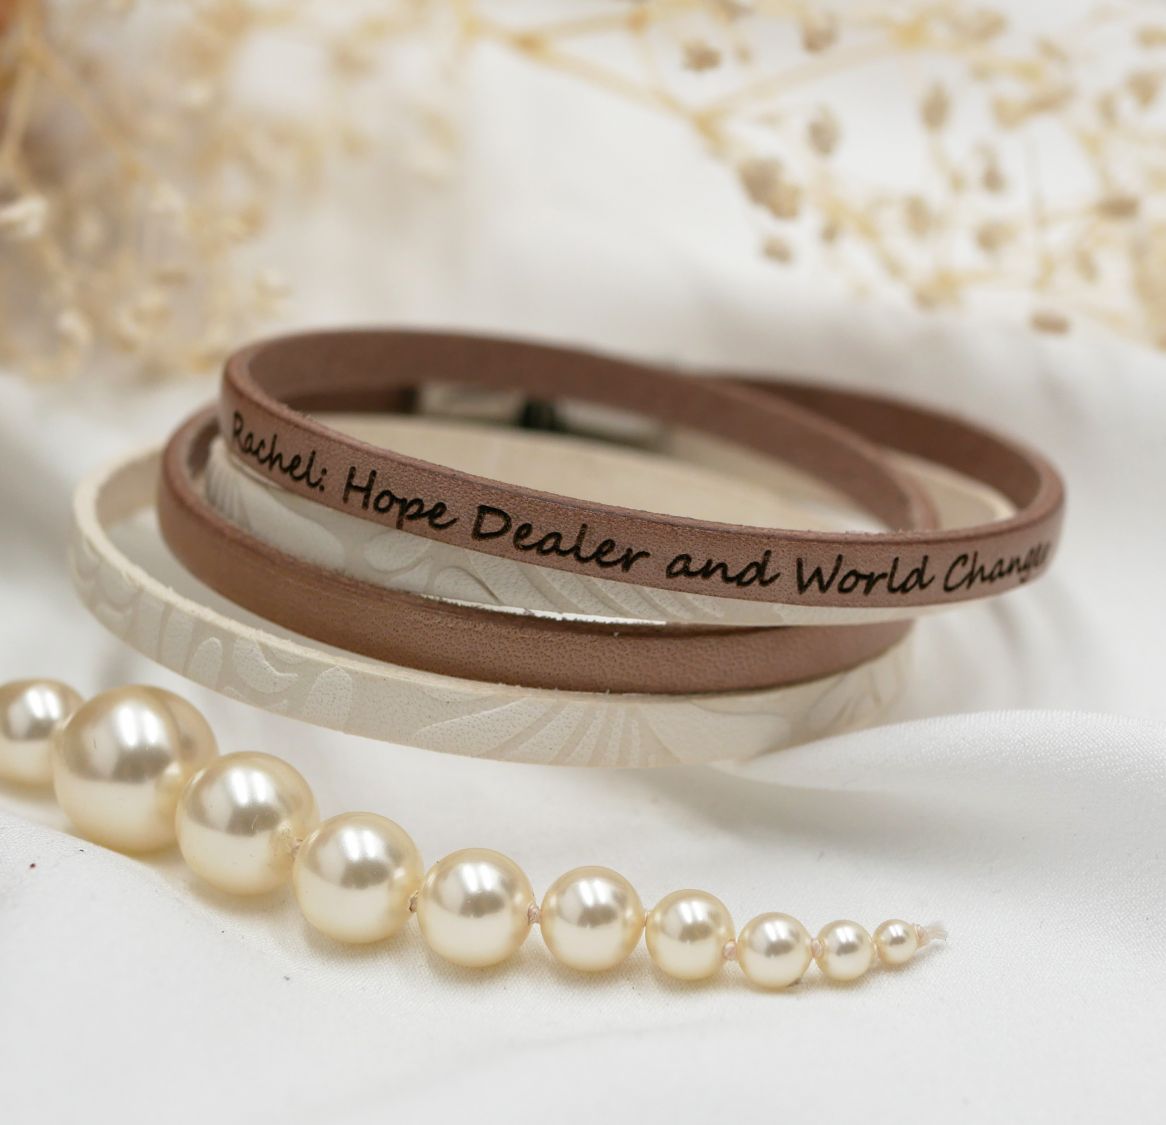 Double white leather bracelet with relief and color of your choice to be personalized by engraving